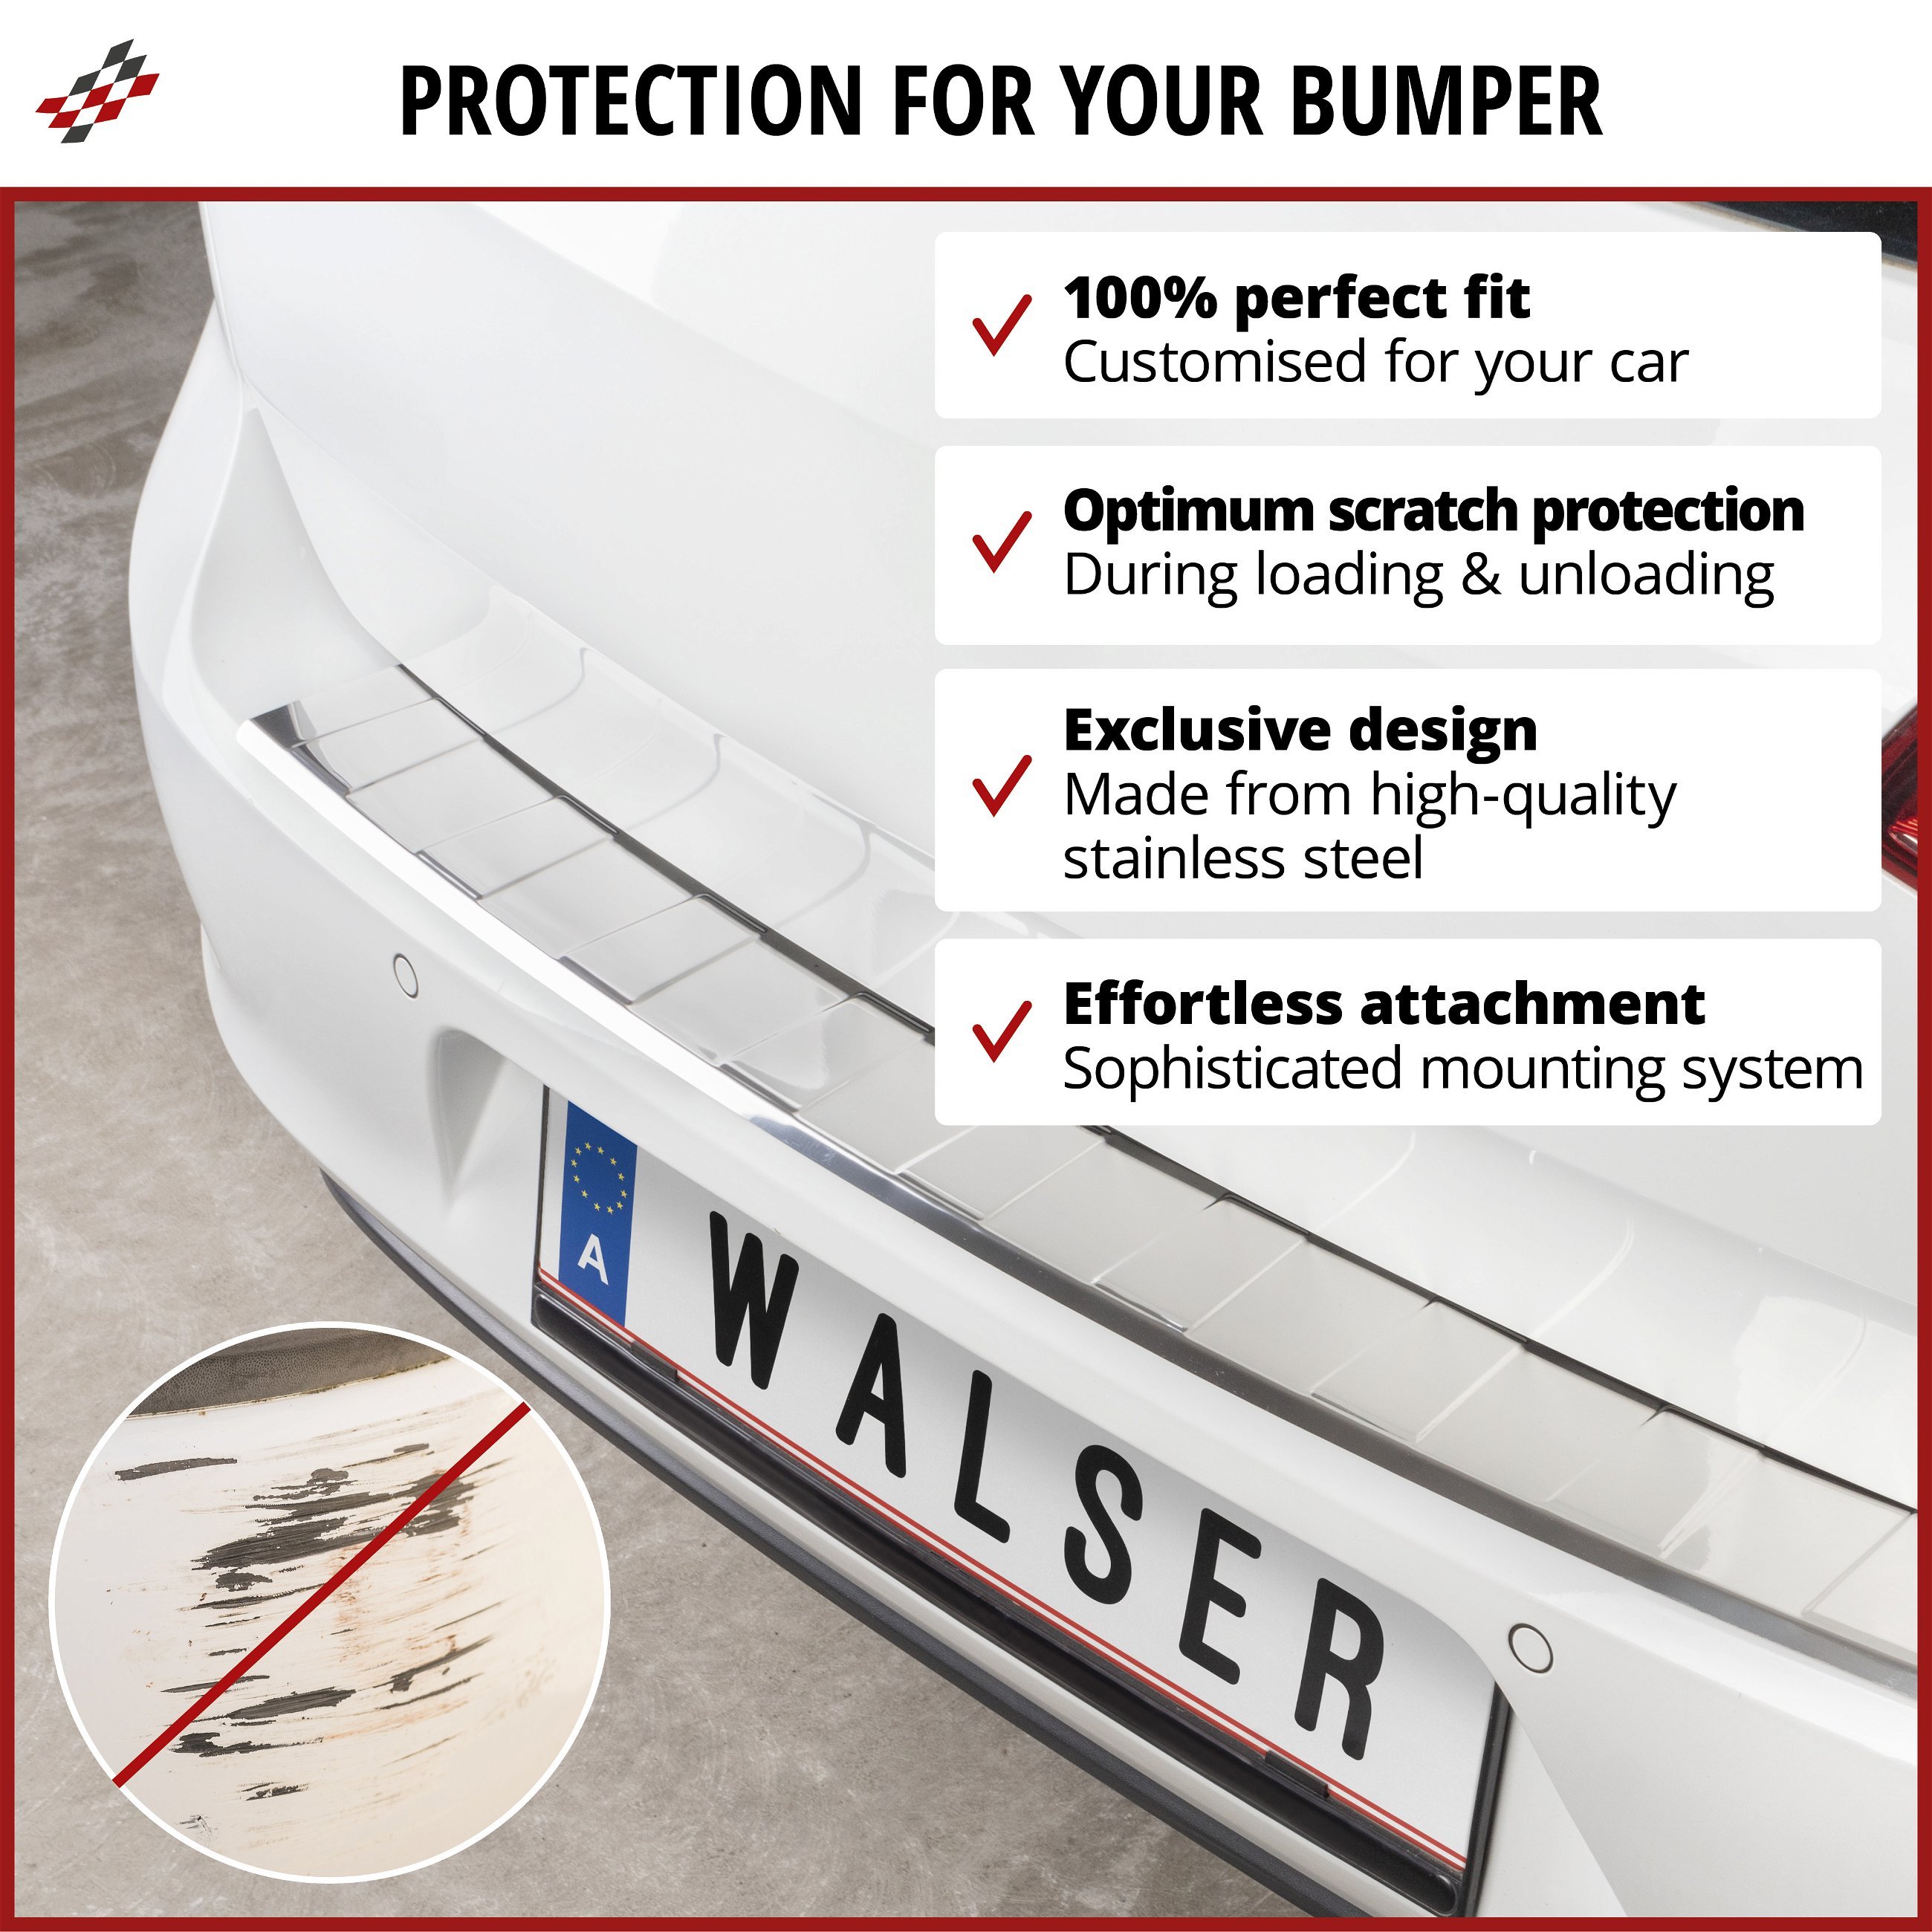 Bumper Protection Proguard made of stainless steel for VW Transporter T6/Caravelle T6 Bus 04/2015-Today